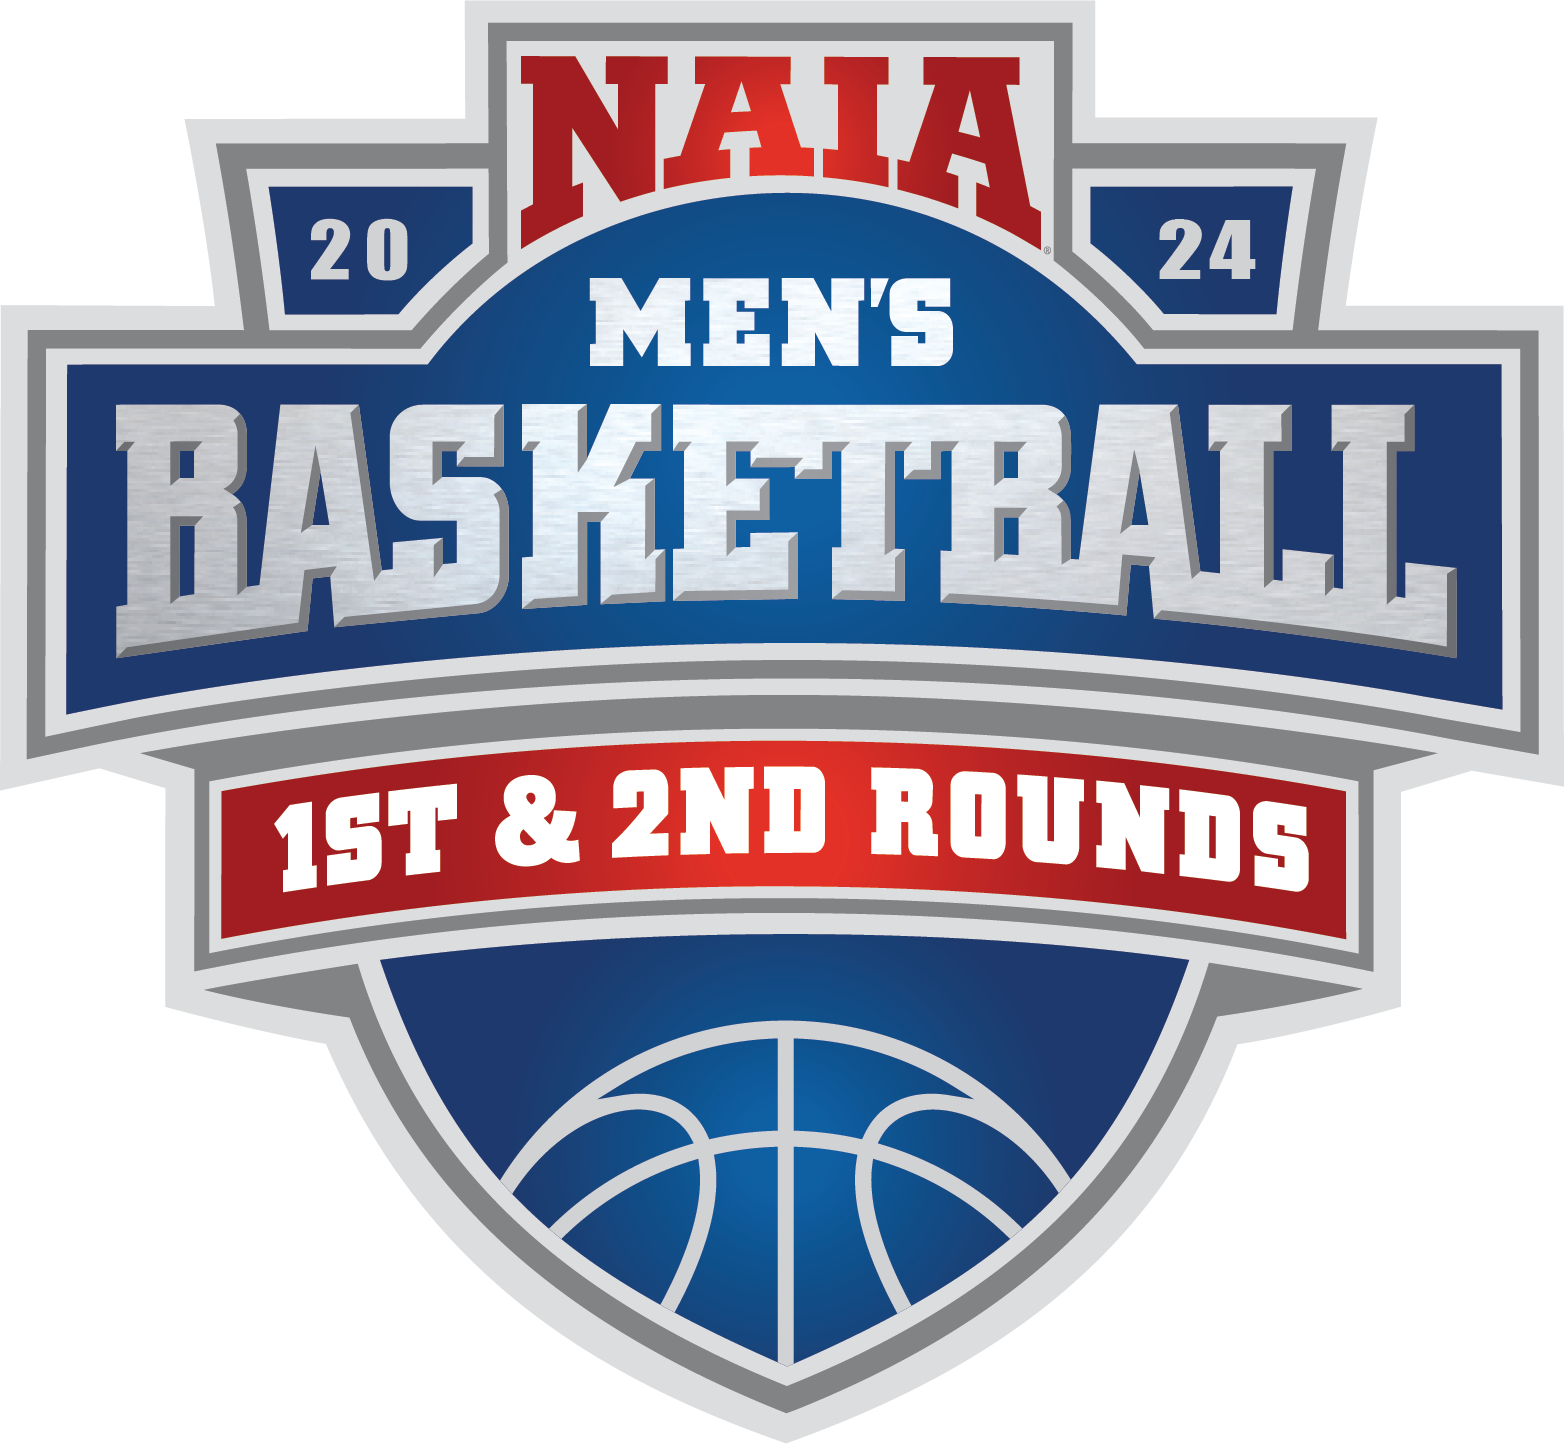 NAIA Men's Basketball National Championship First & Second Round